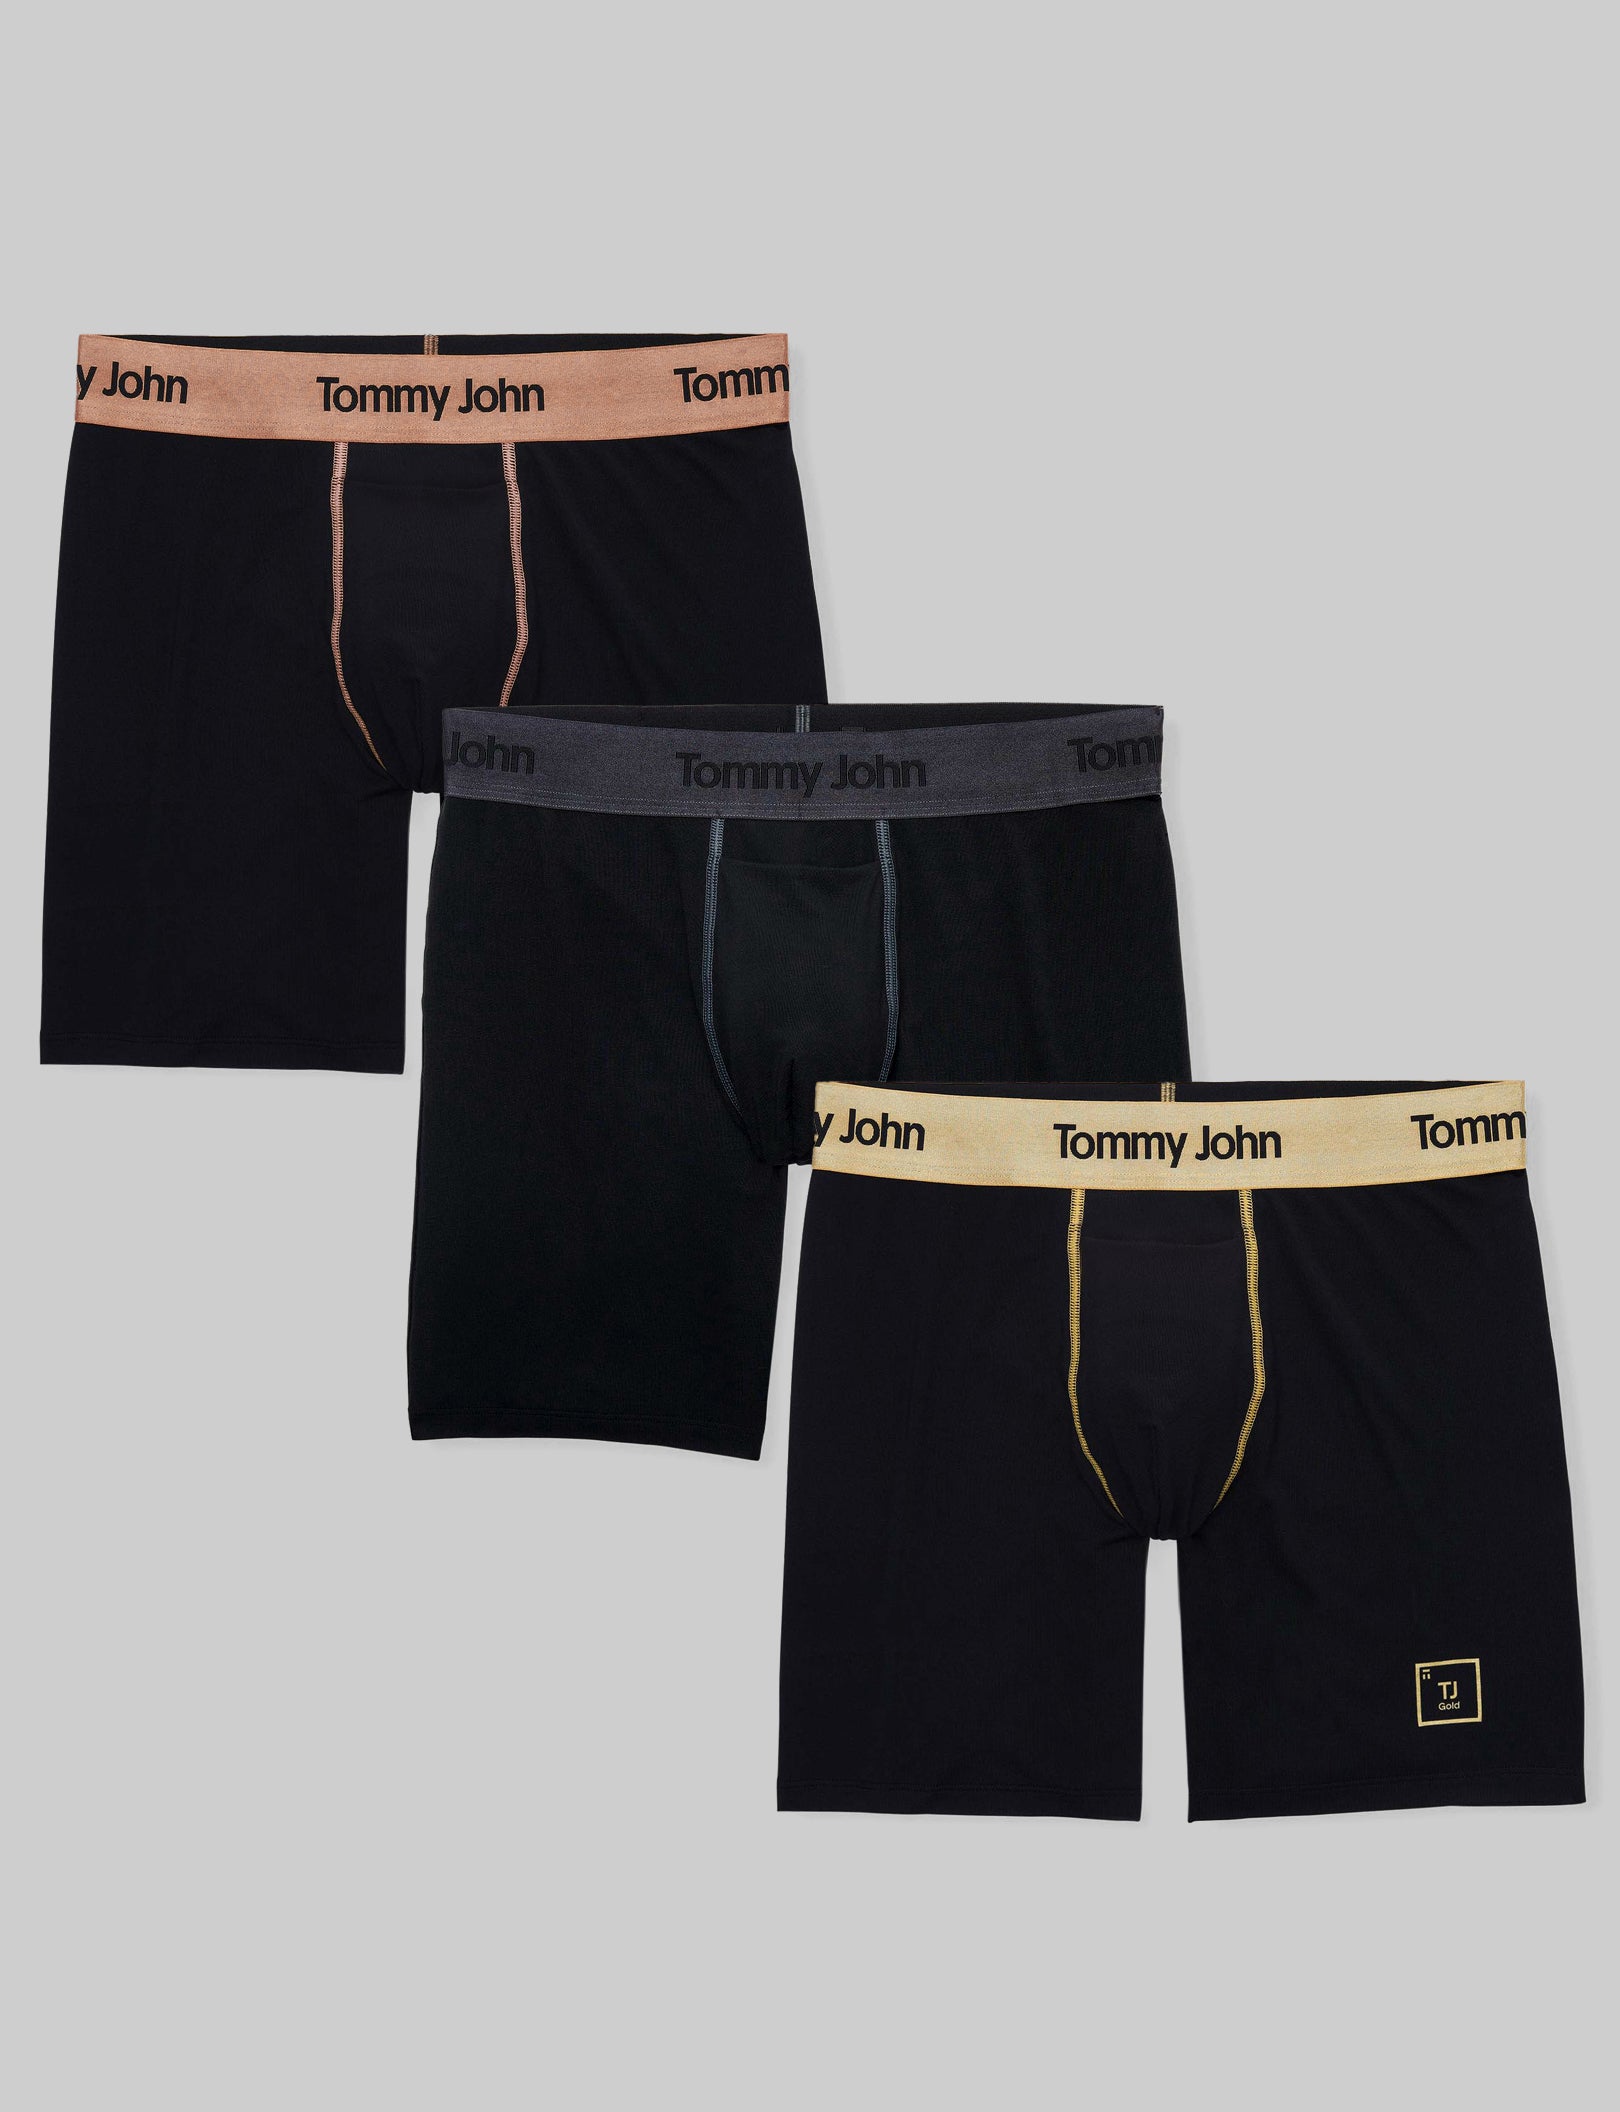 Second Skin Mid-Length Boxer Brief 6 – Tommy John